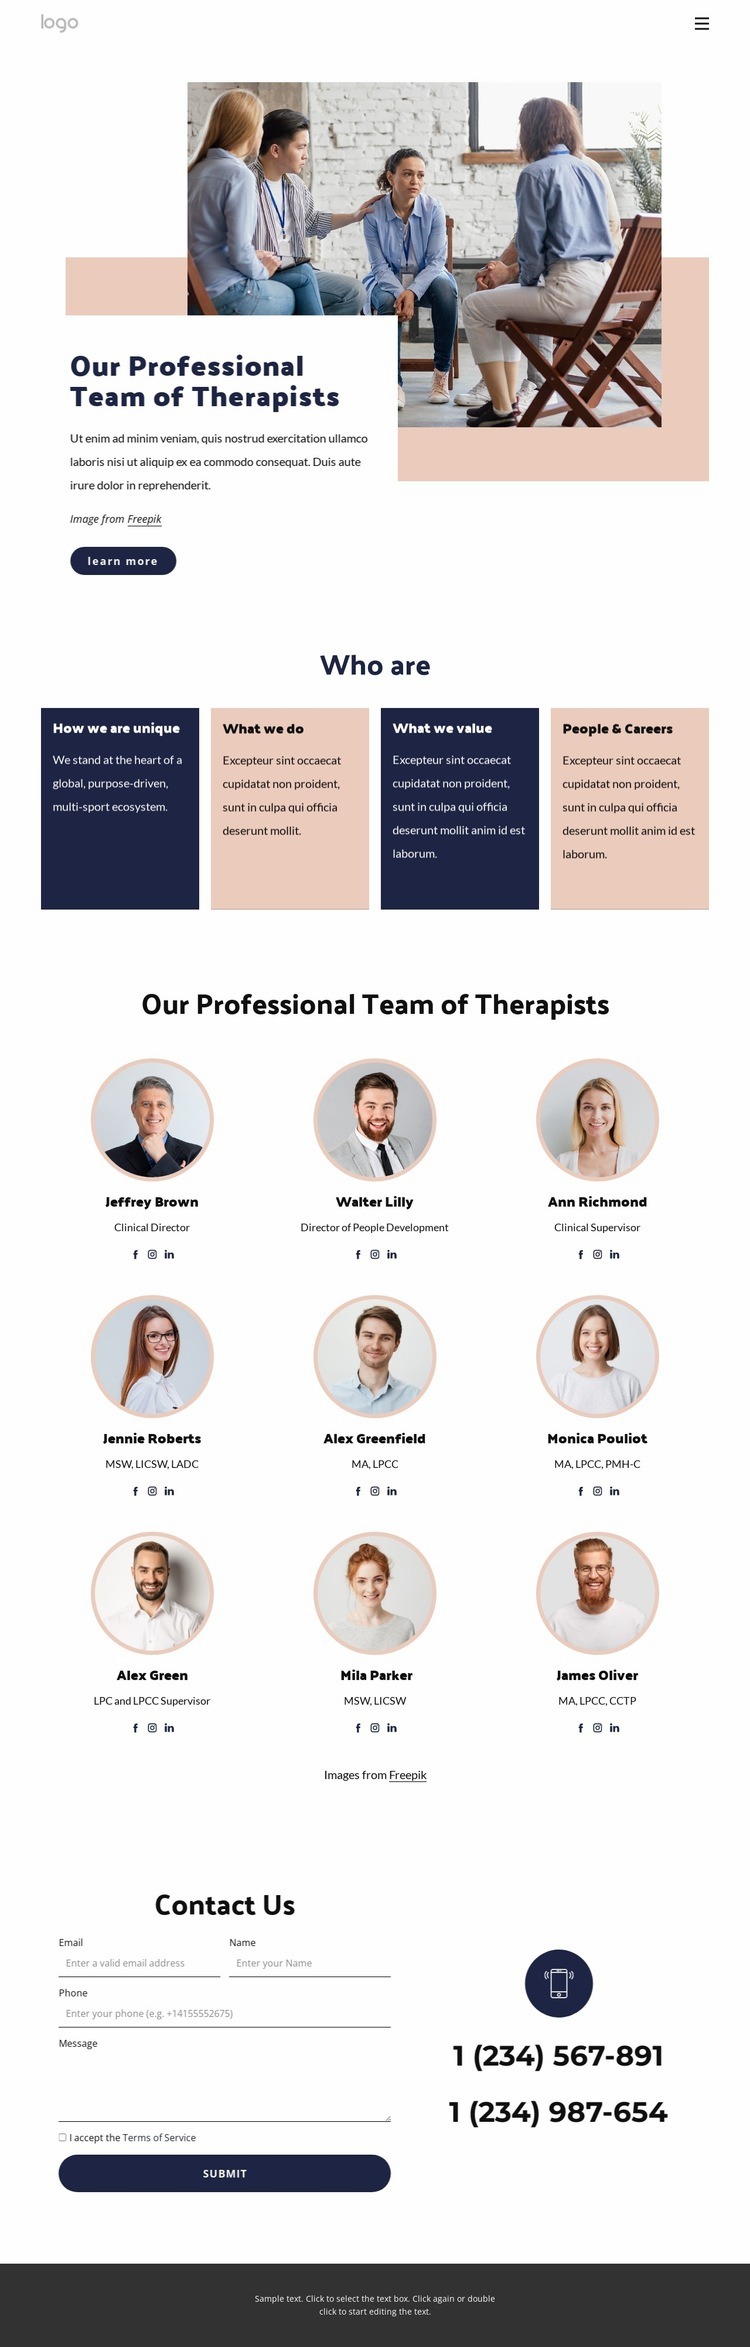 Our professional team of therapists Web Page Design